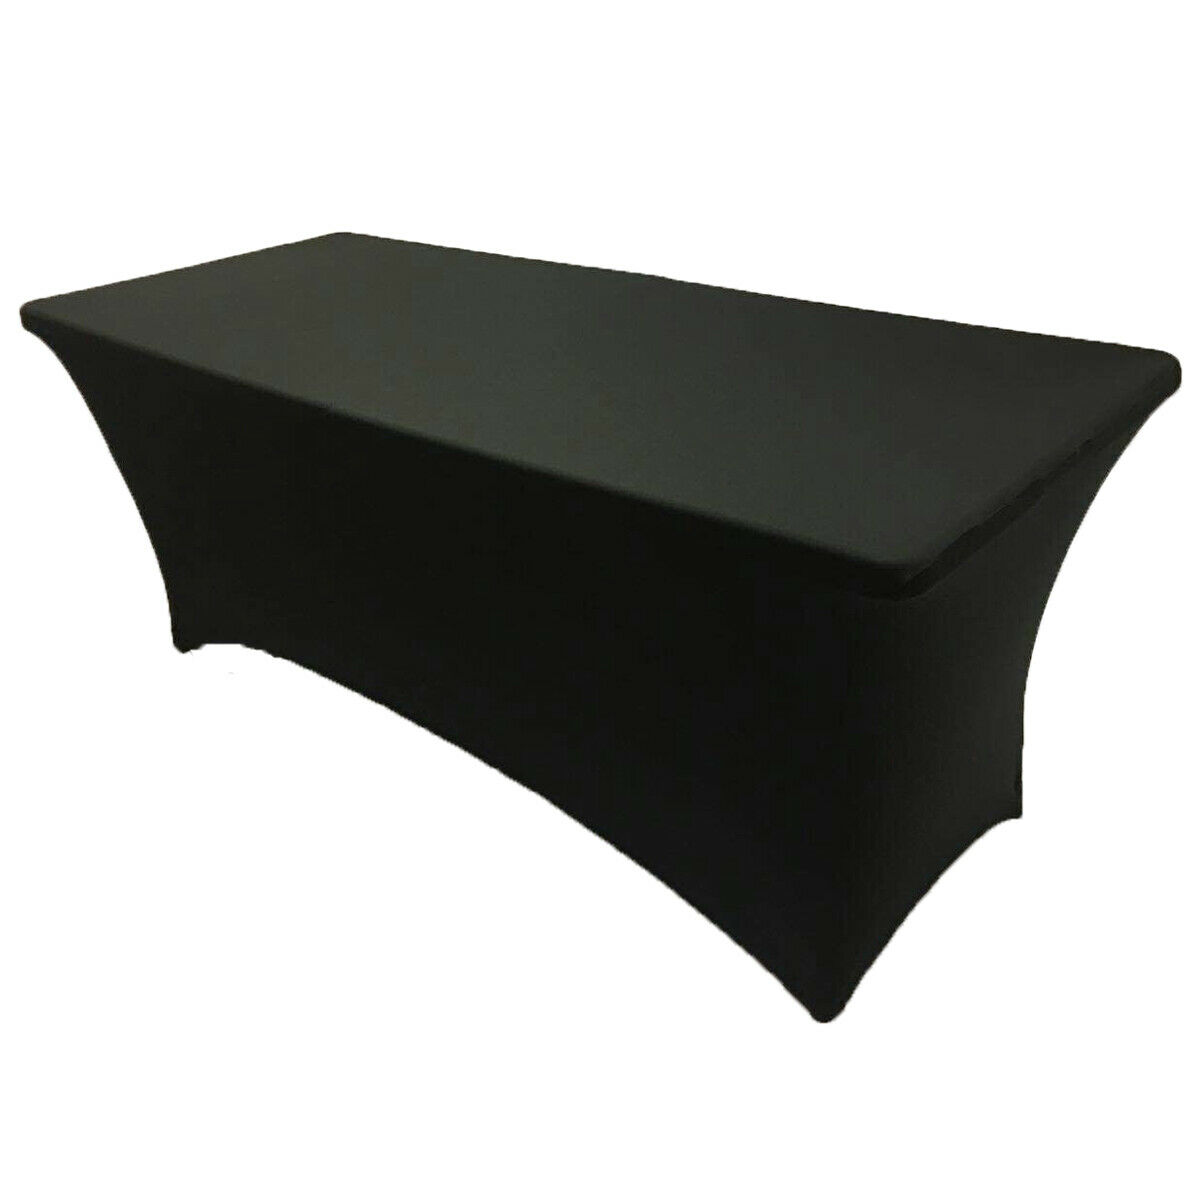 8' Ft. Spandex Fitted Stretch Tablecloth Table Cover Wedding Banquet Party Black